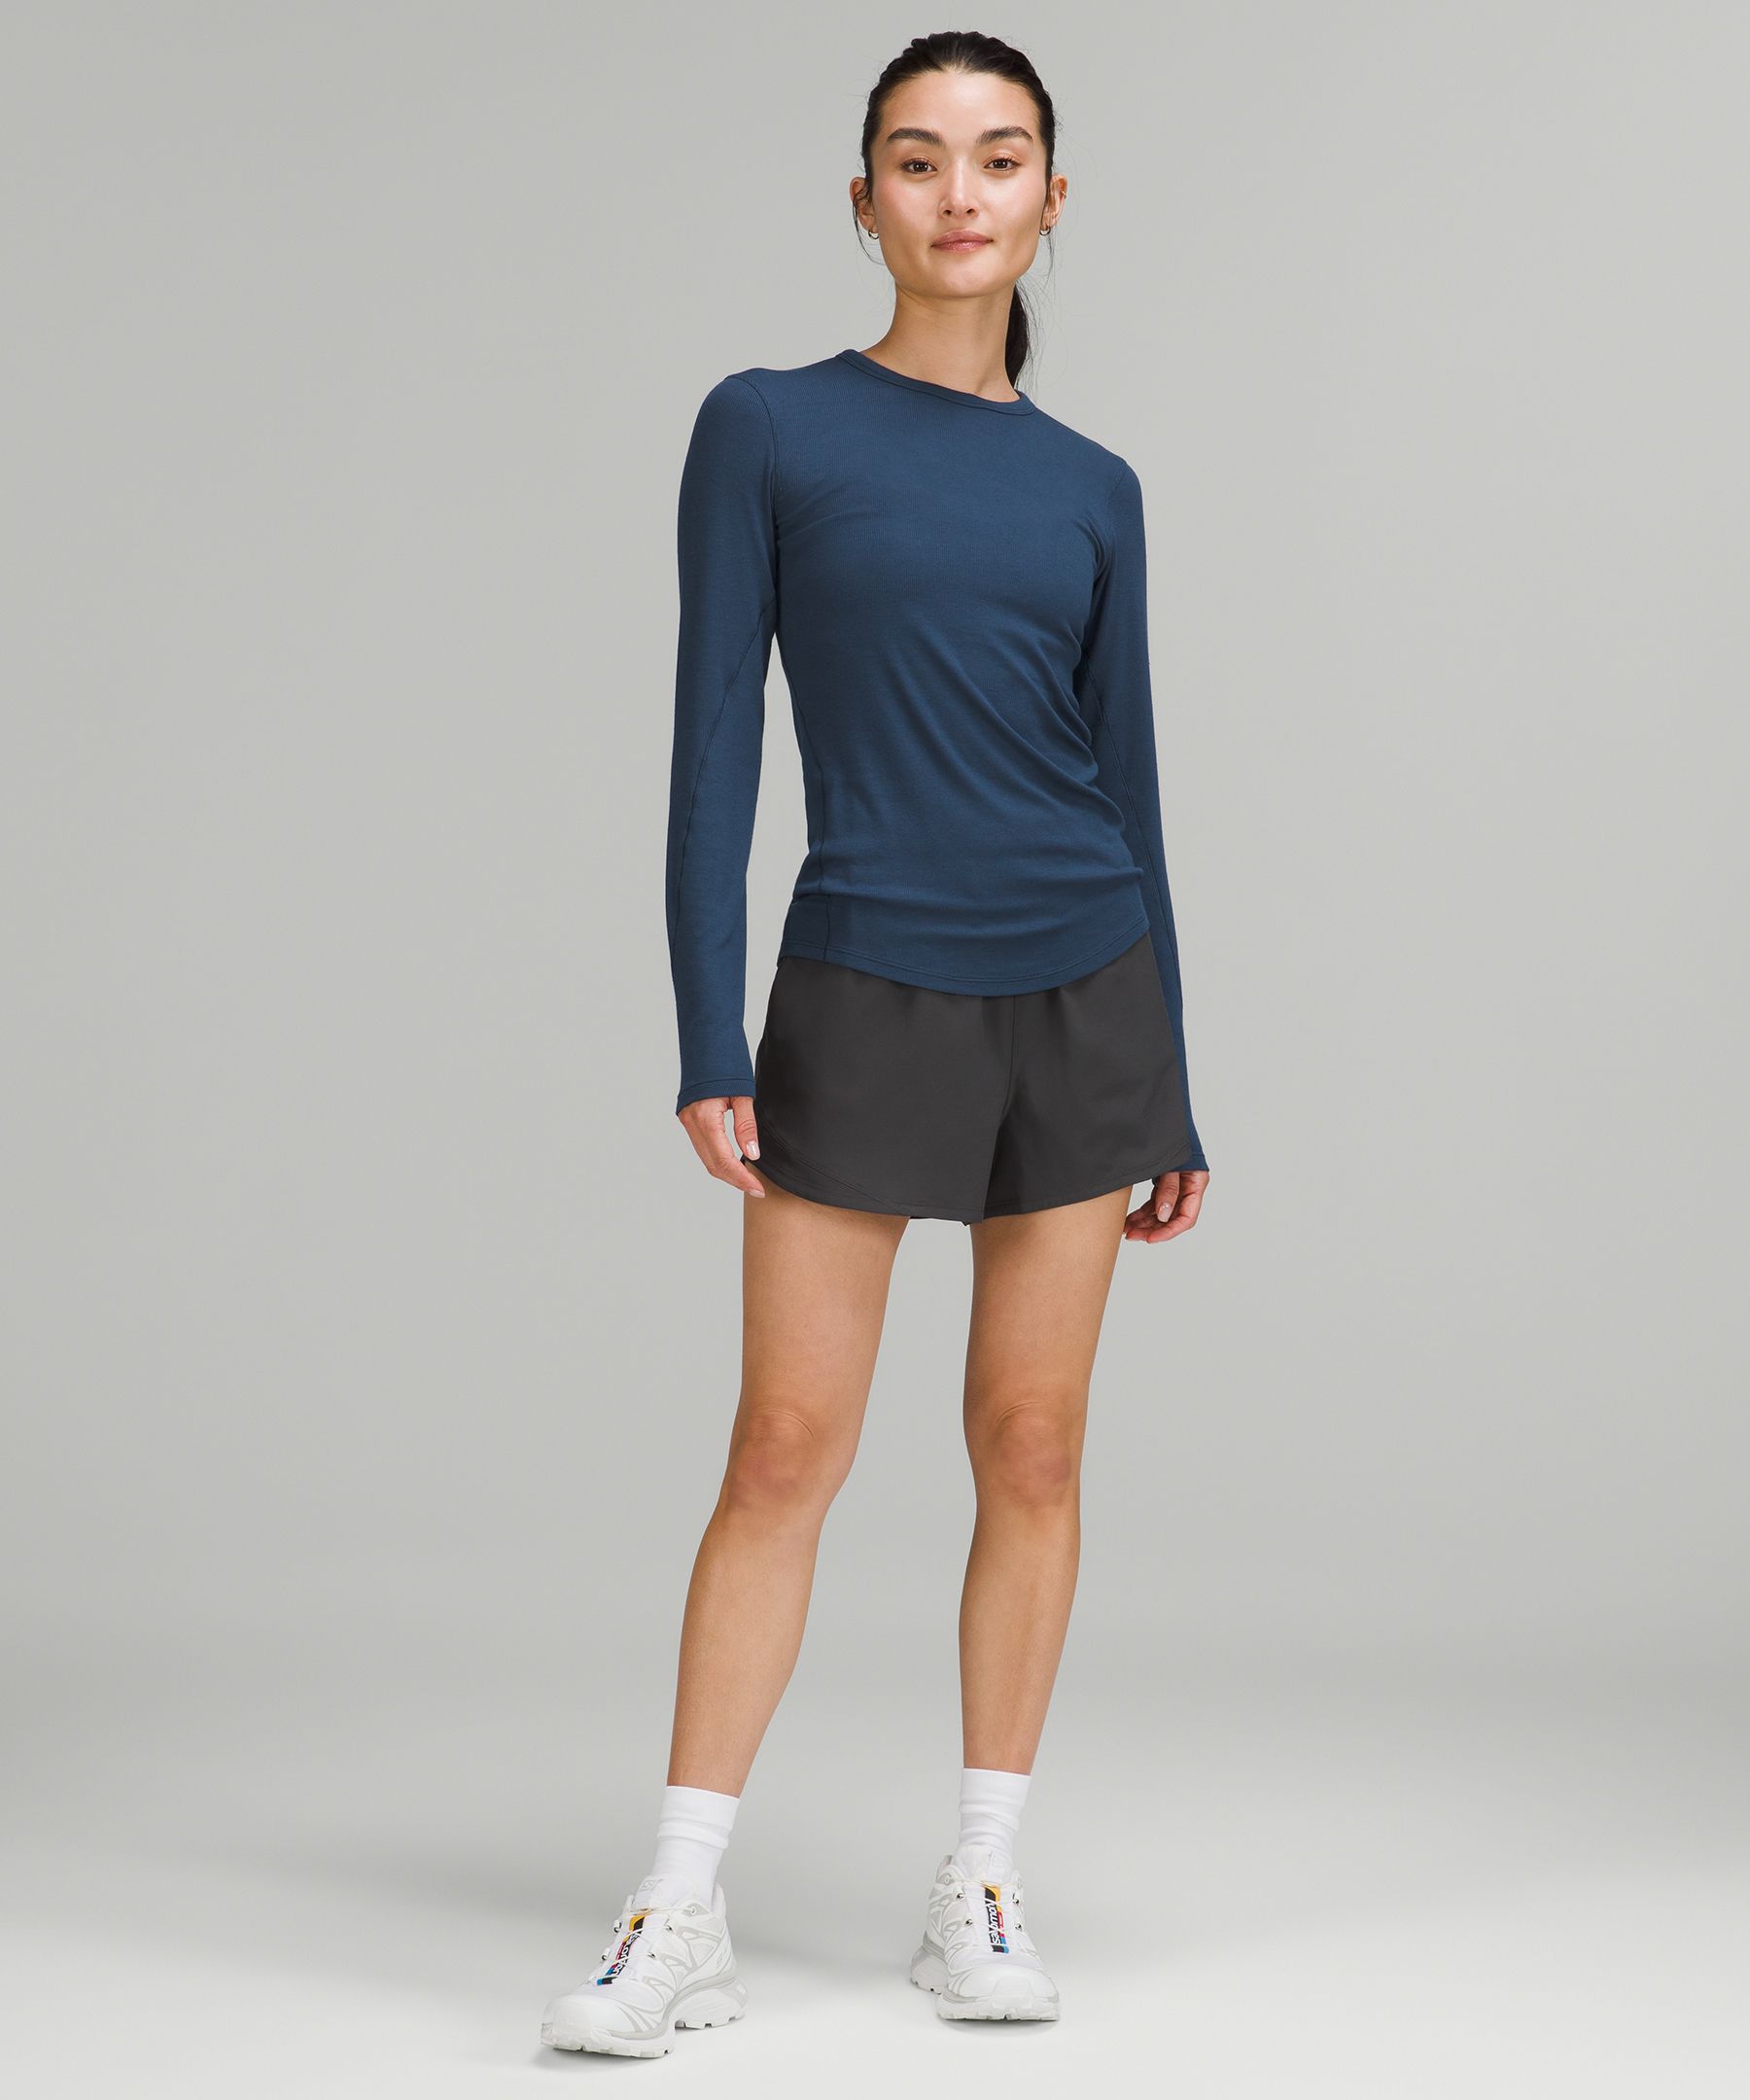 Hold Tight Long Sleeve Fit Pics - GET IT!!! : r/lululemon